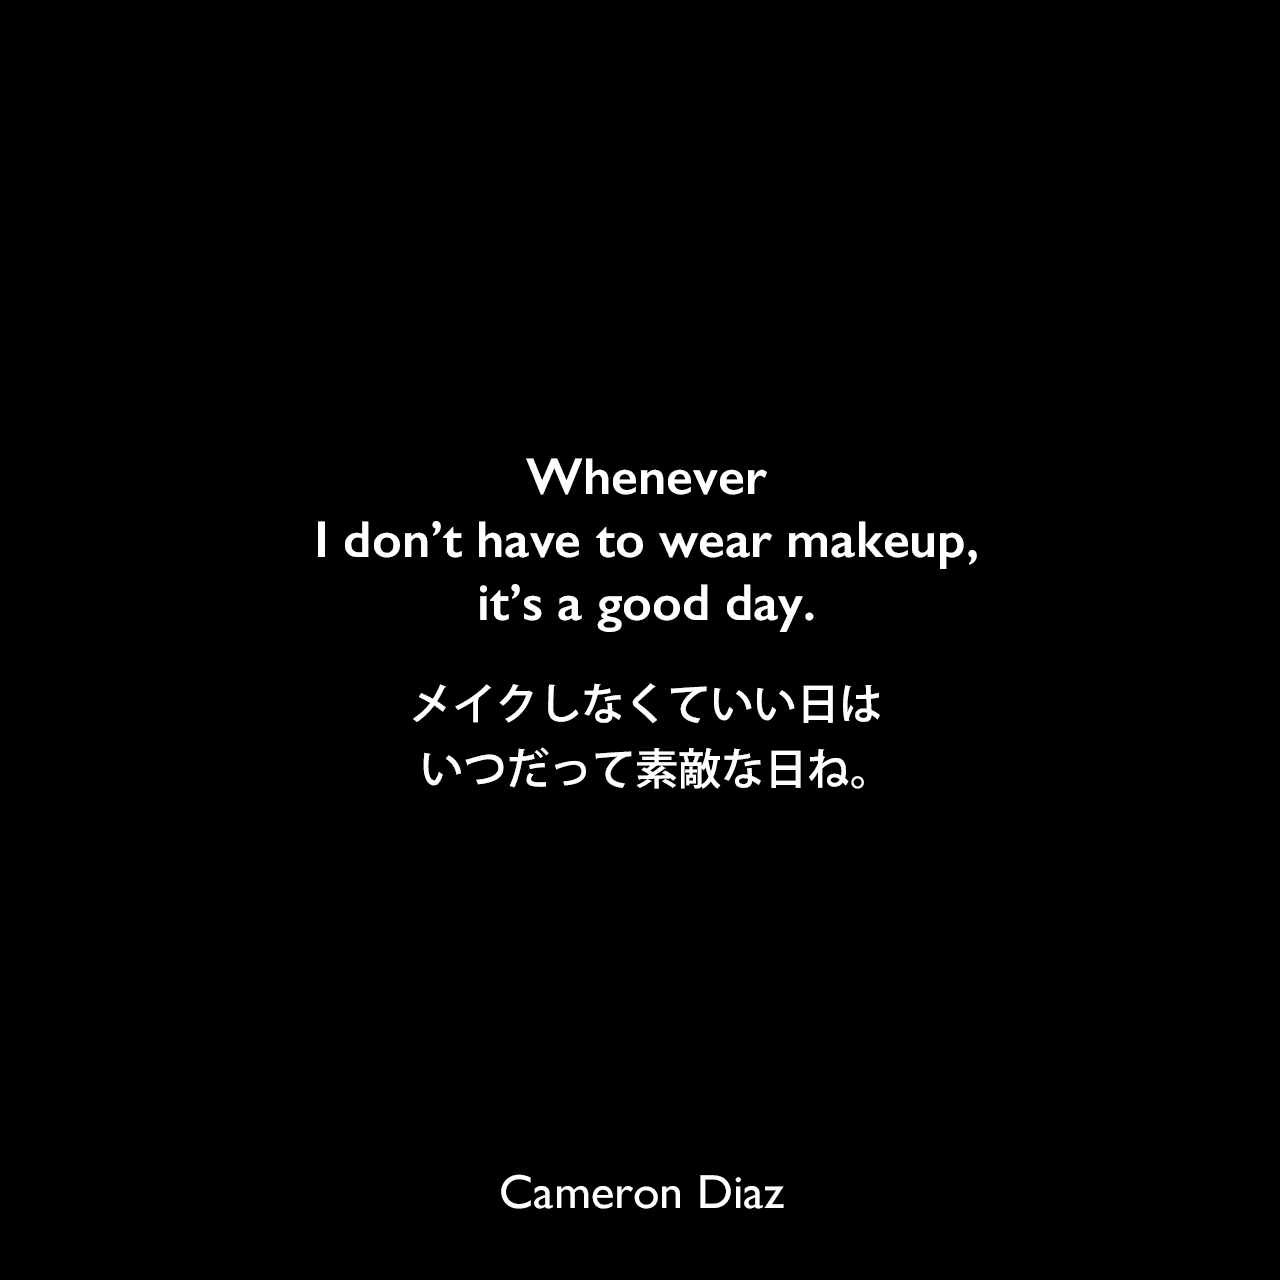 Whenever I don’t have to wear makeup, it’s a good day.メイクしなくていい日はいつだって素敵な日ね。Cameron Diaz